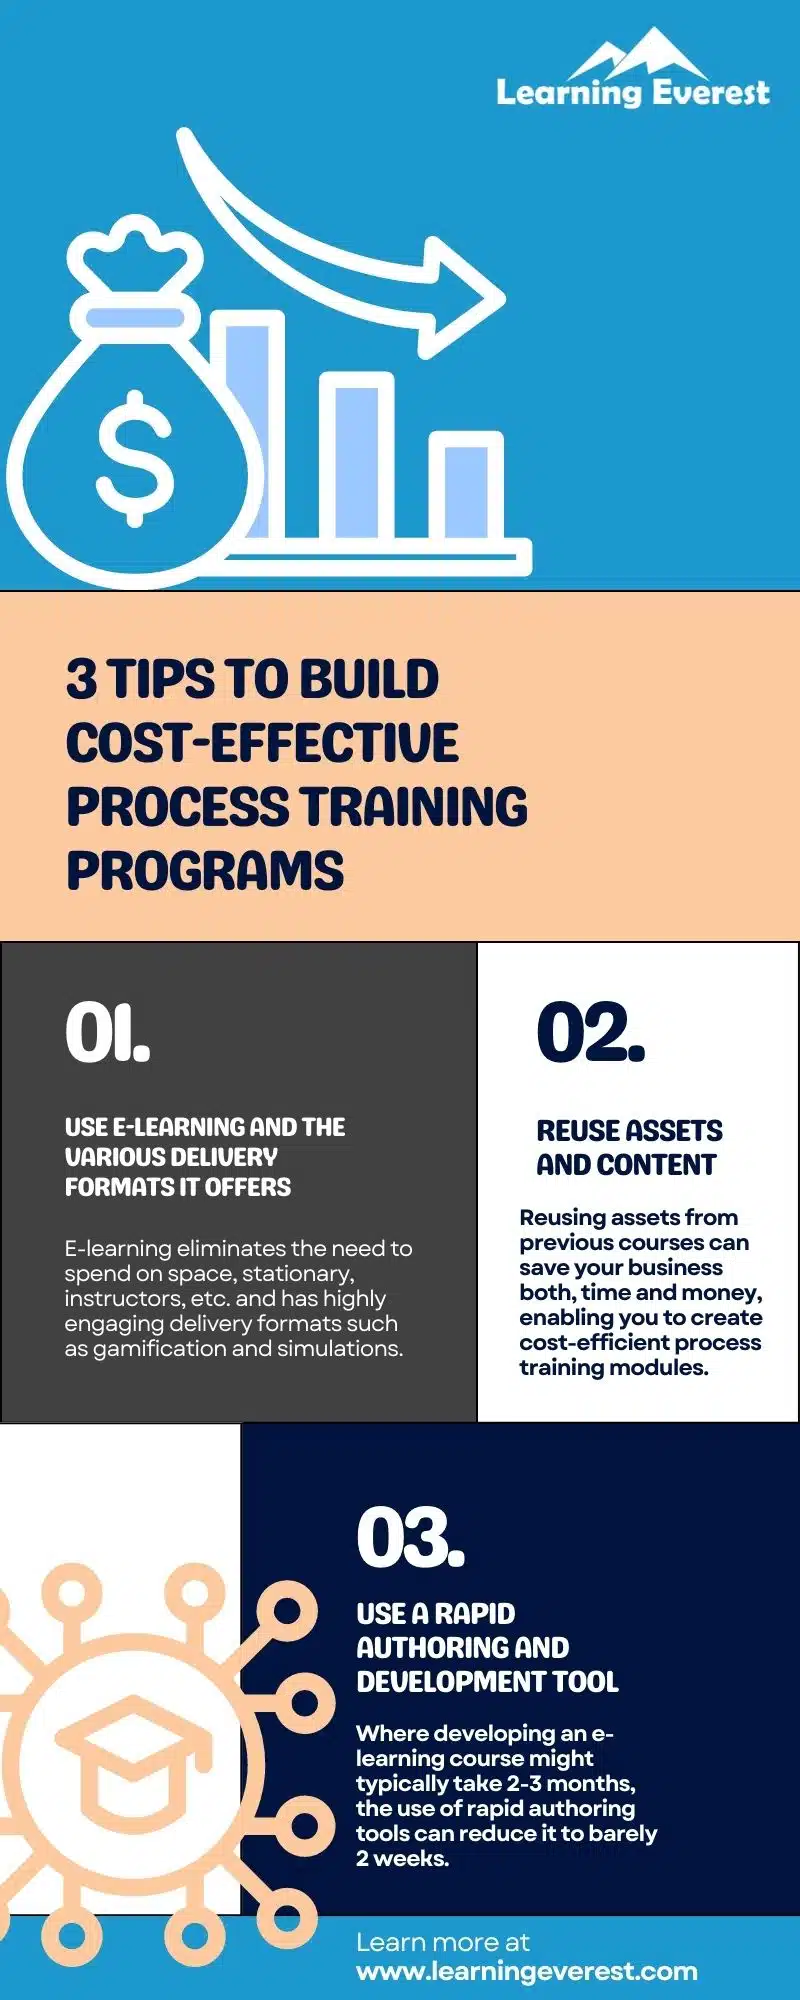 3 Tips to Build Cost-Effective Process Training Programs